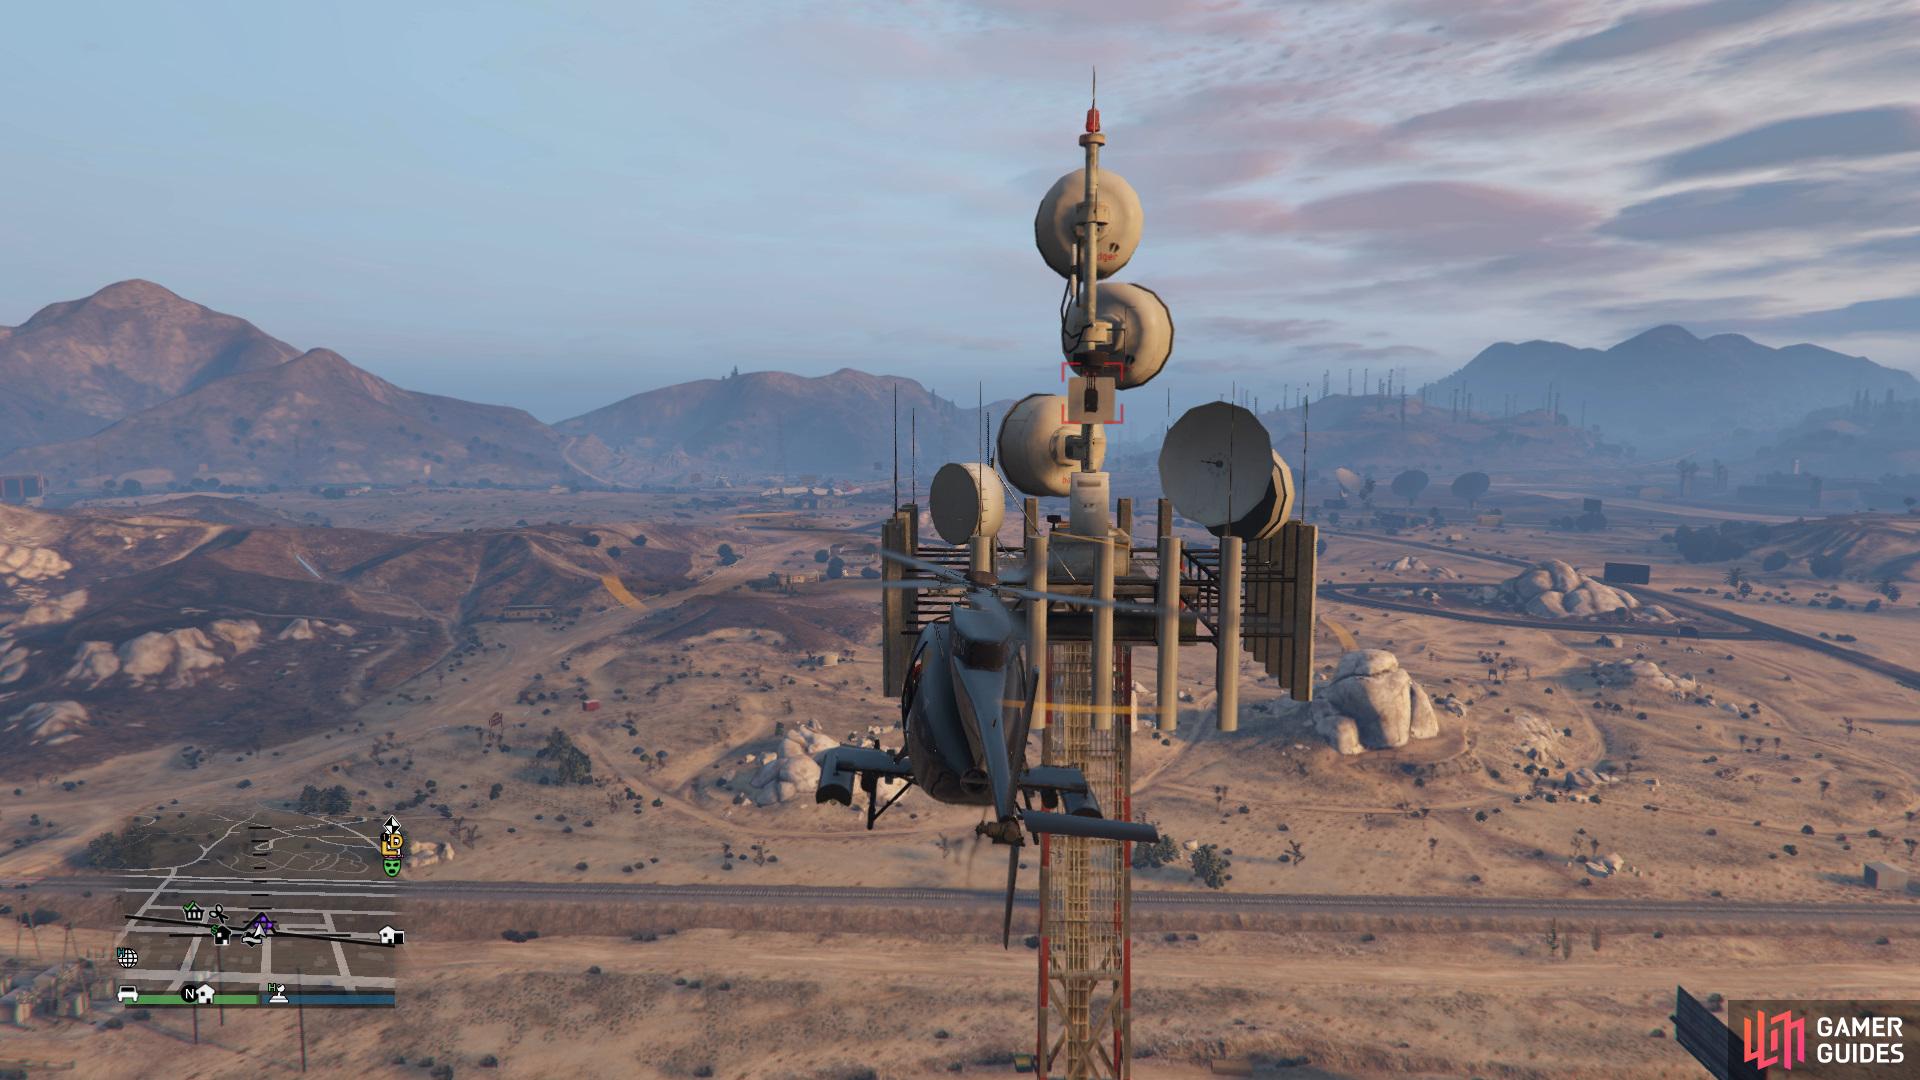 to find the signal jammer on the signal tower.